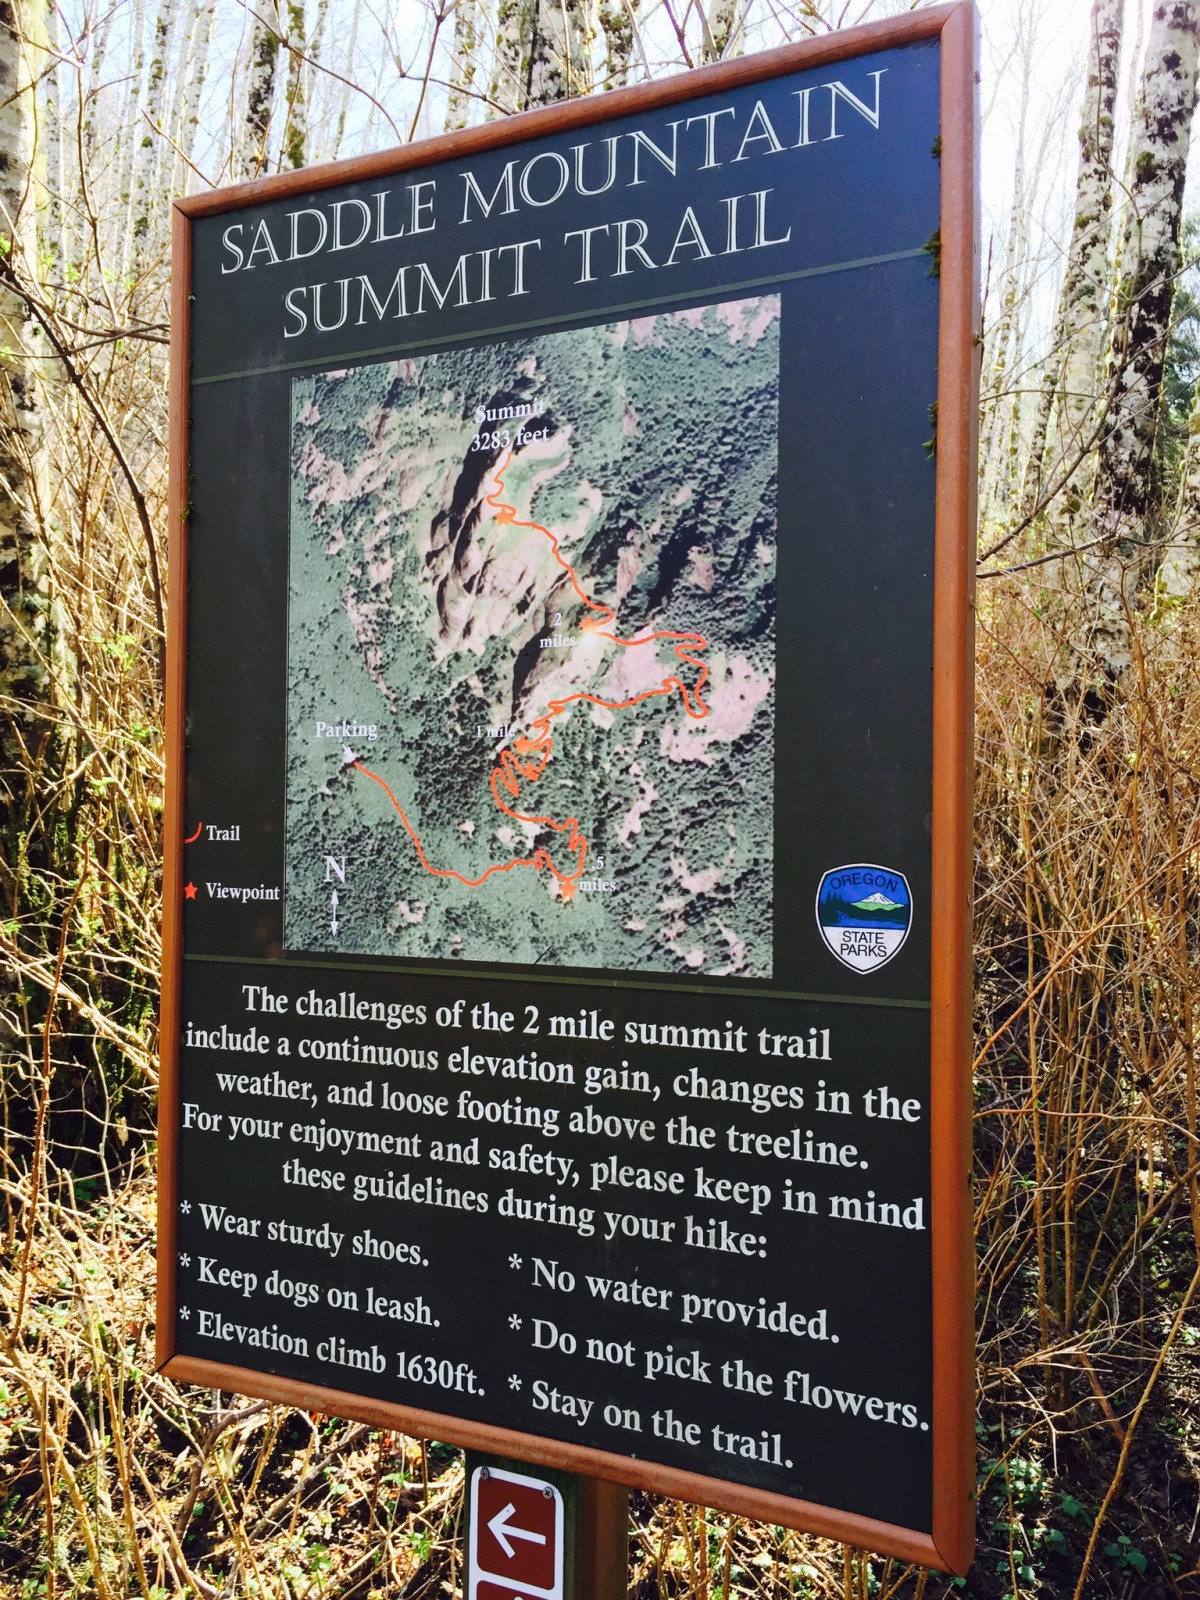 Trail Tip: Use your cell phone to take a picture of the map at the trailhead in case you get lost or forgot to bring a GPS.